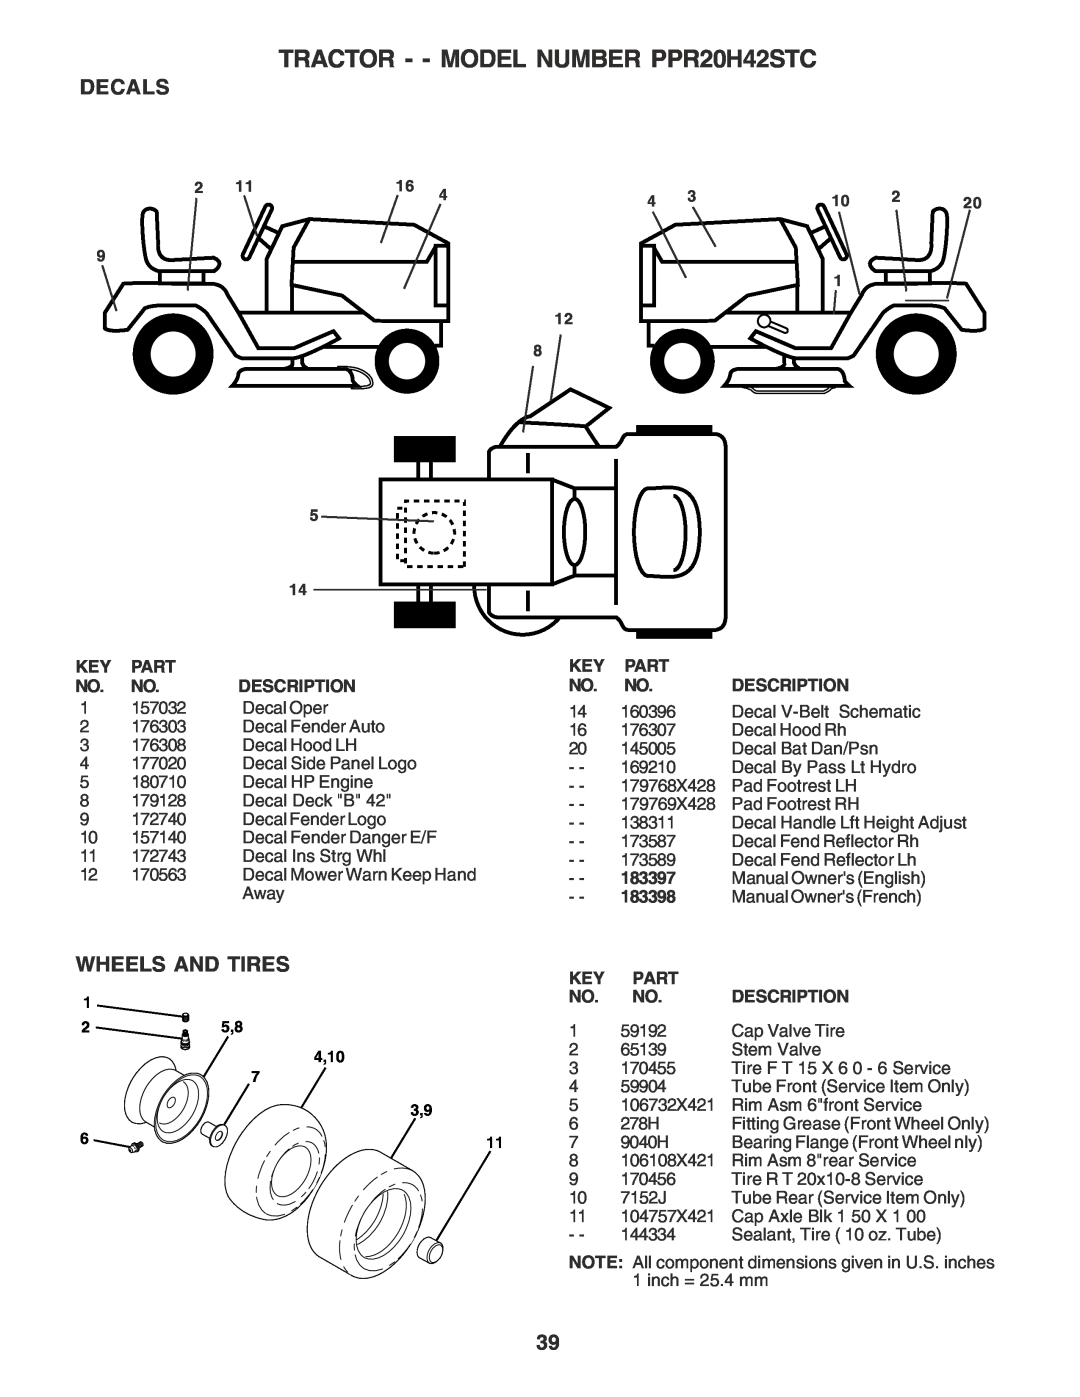 Poulan owner manual Decals, Wheels And Tires, TRACTOR - - MODEL NUMBER PPR20H42STC, 25,8 4,10 